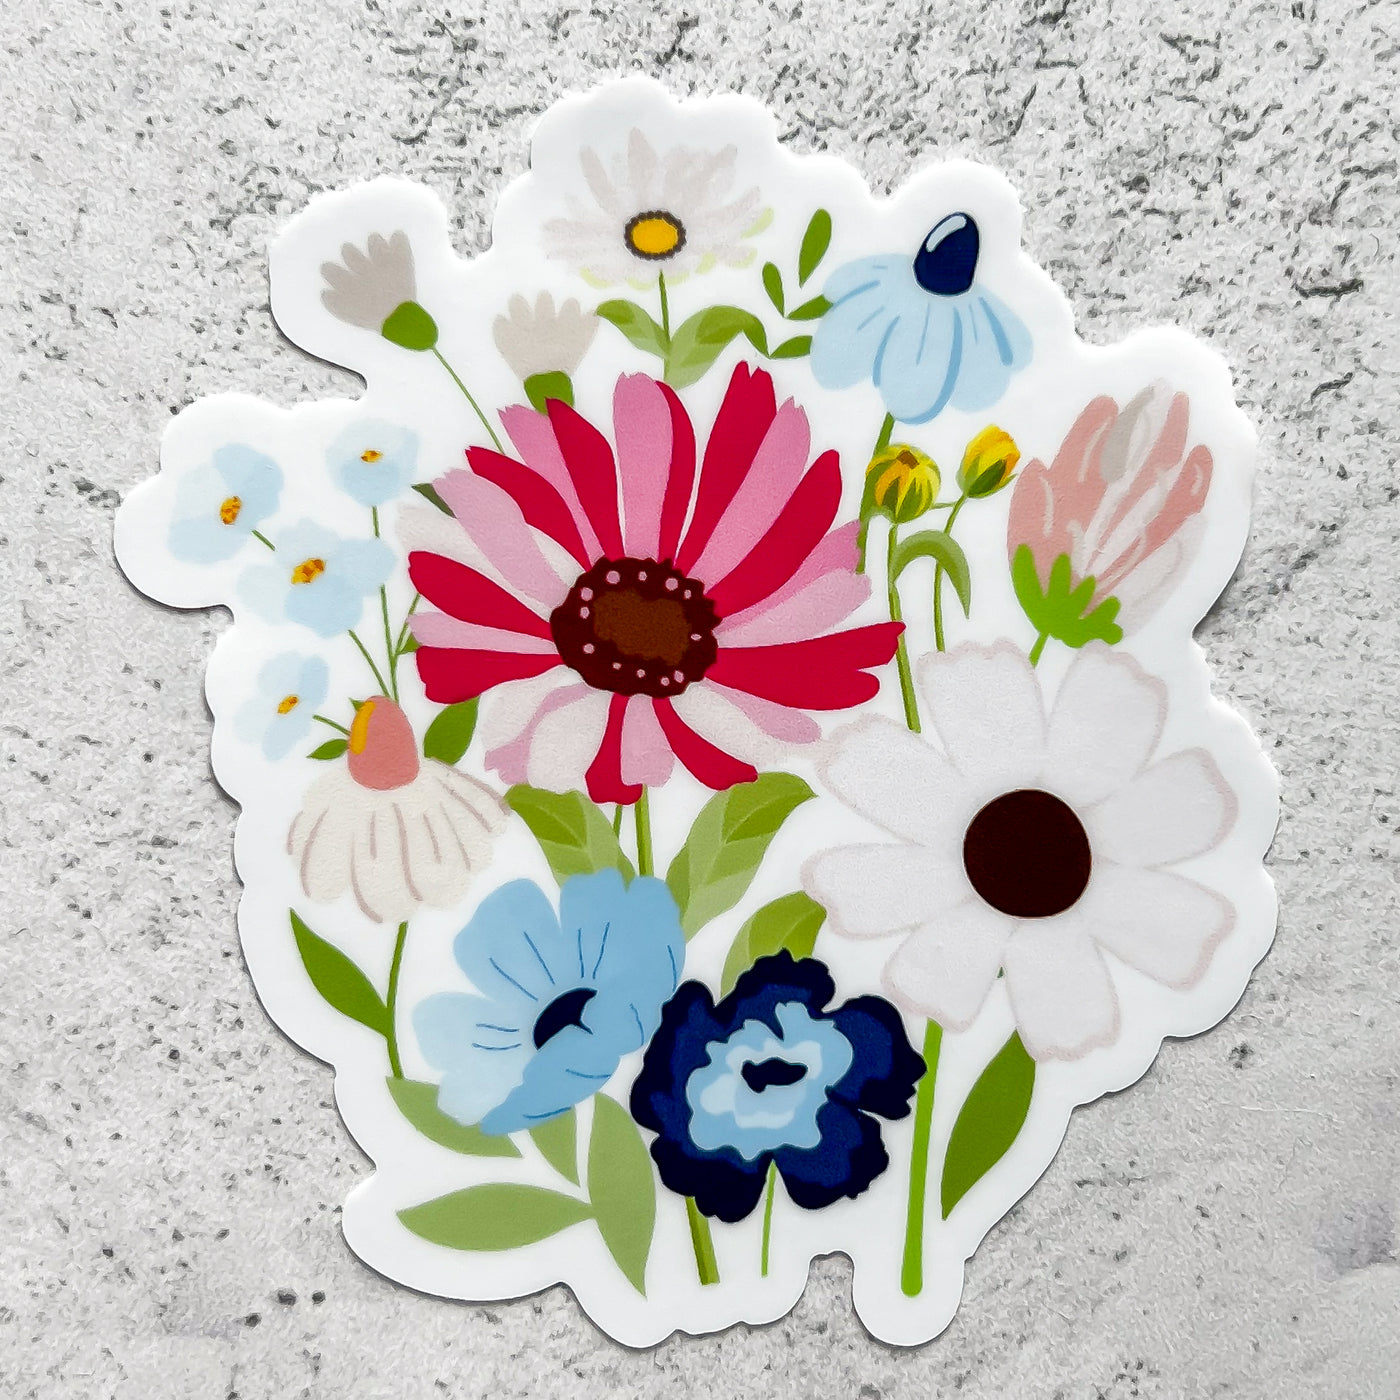 Spring blooms bouquet classic vinyl sticker by Simpliday Paper Olga Nagorna.